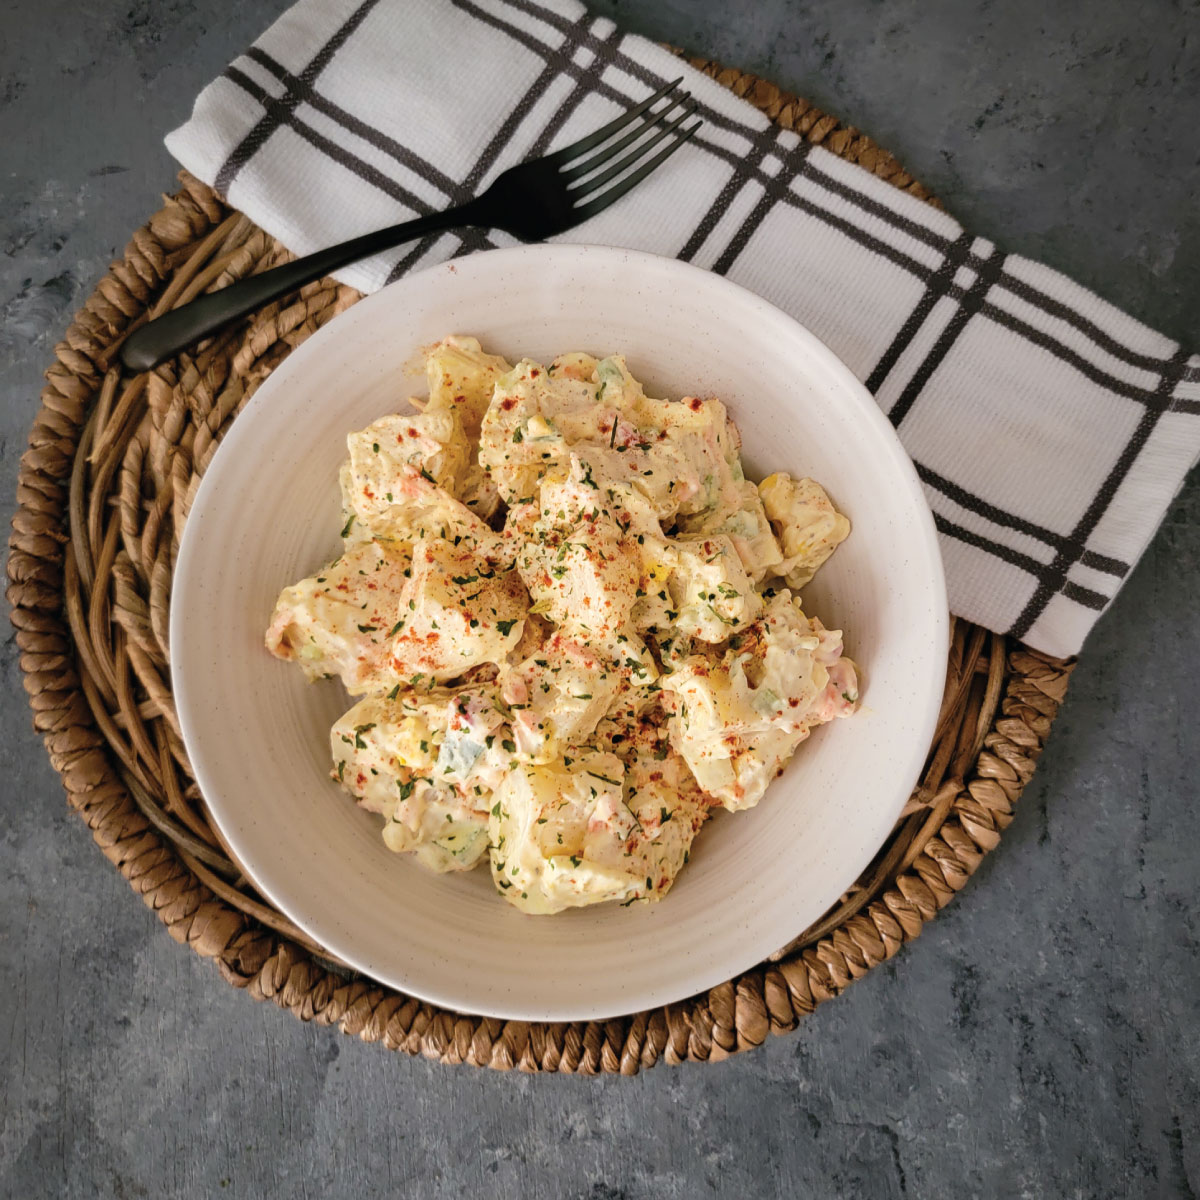 Potato salad prepared and in the bowl ready to be served.